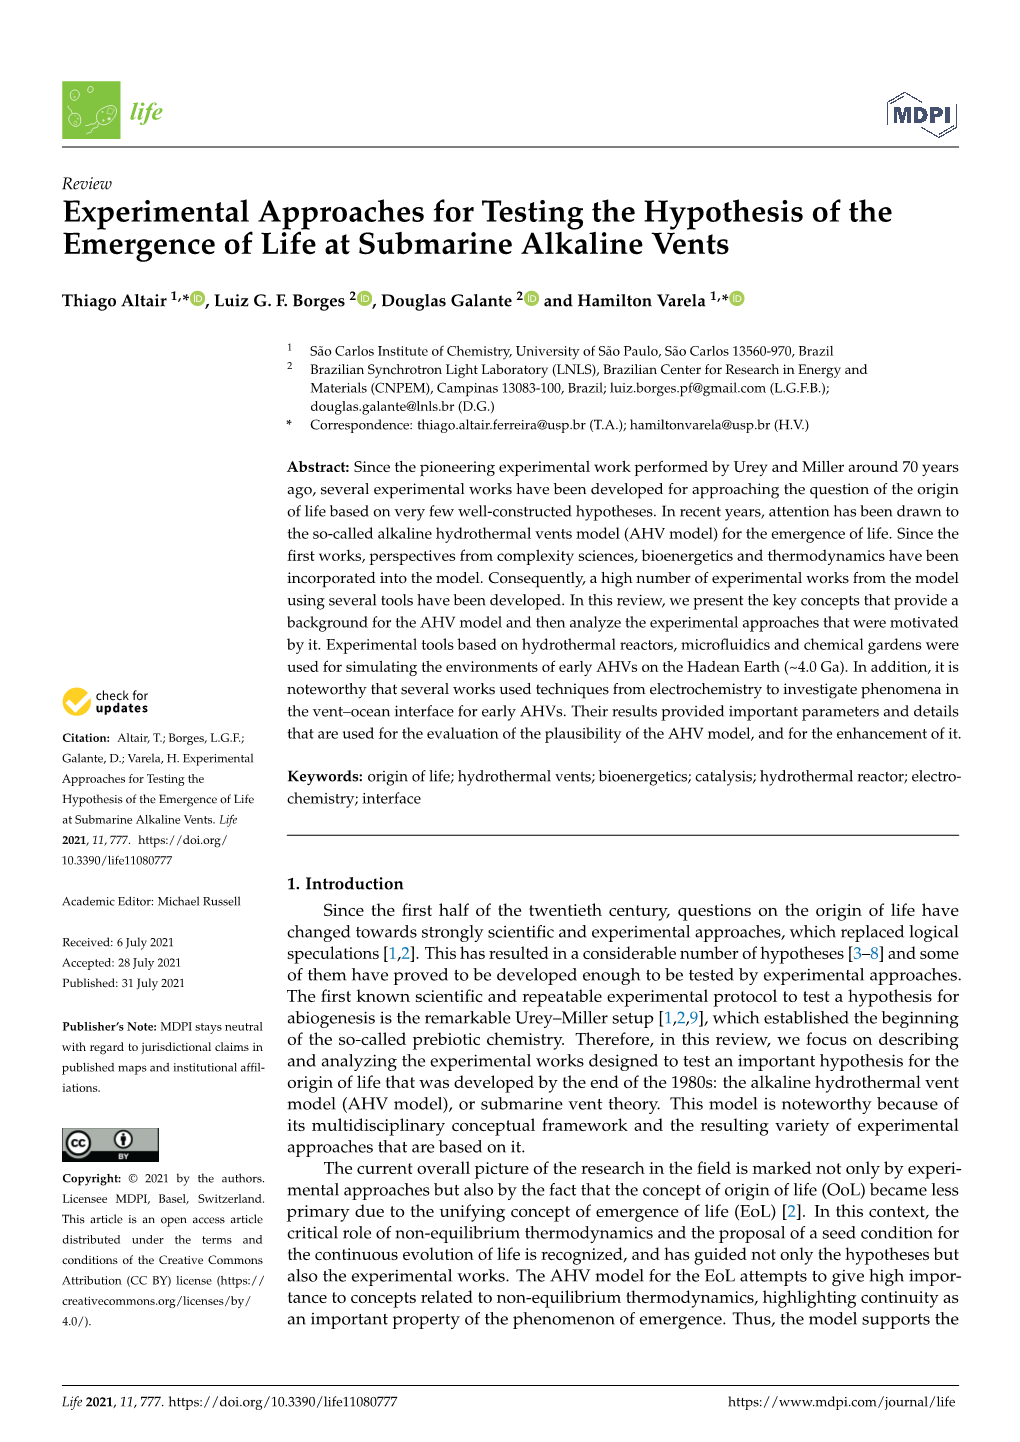 Experimental Approaches for Testing the Hypothesis of the Emergence of Life at Submarine Alkaline Vents